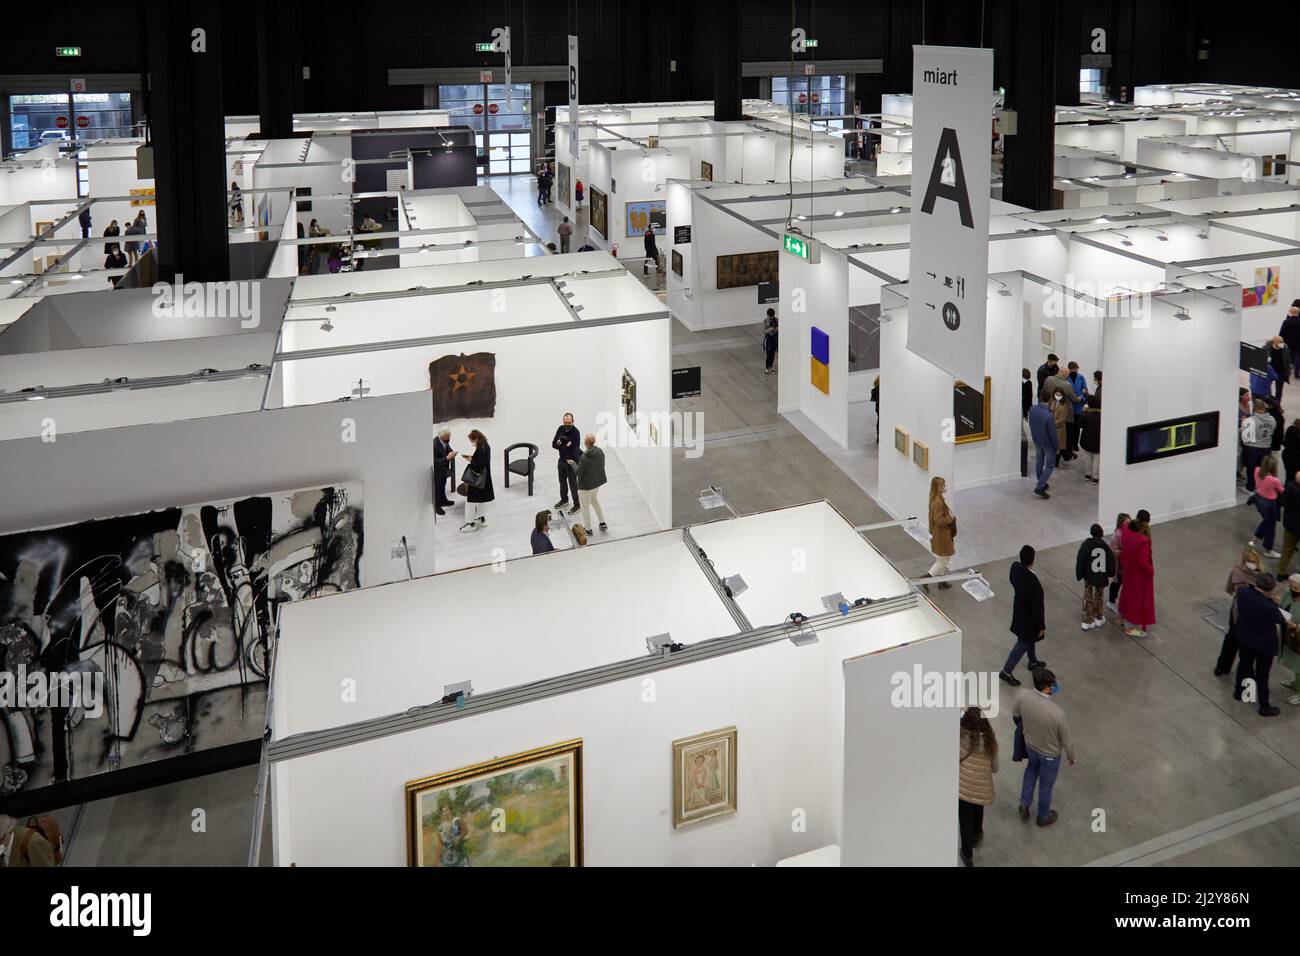 MILAN, ITALY - APRIL 03: Miart 2022, people and art collectors at contemporary art fair in Milan, view from above Stock Photo